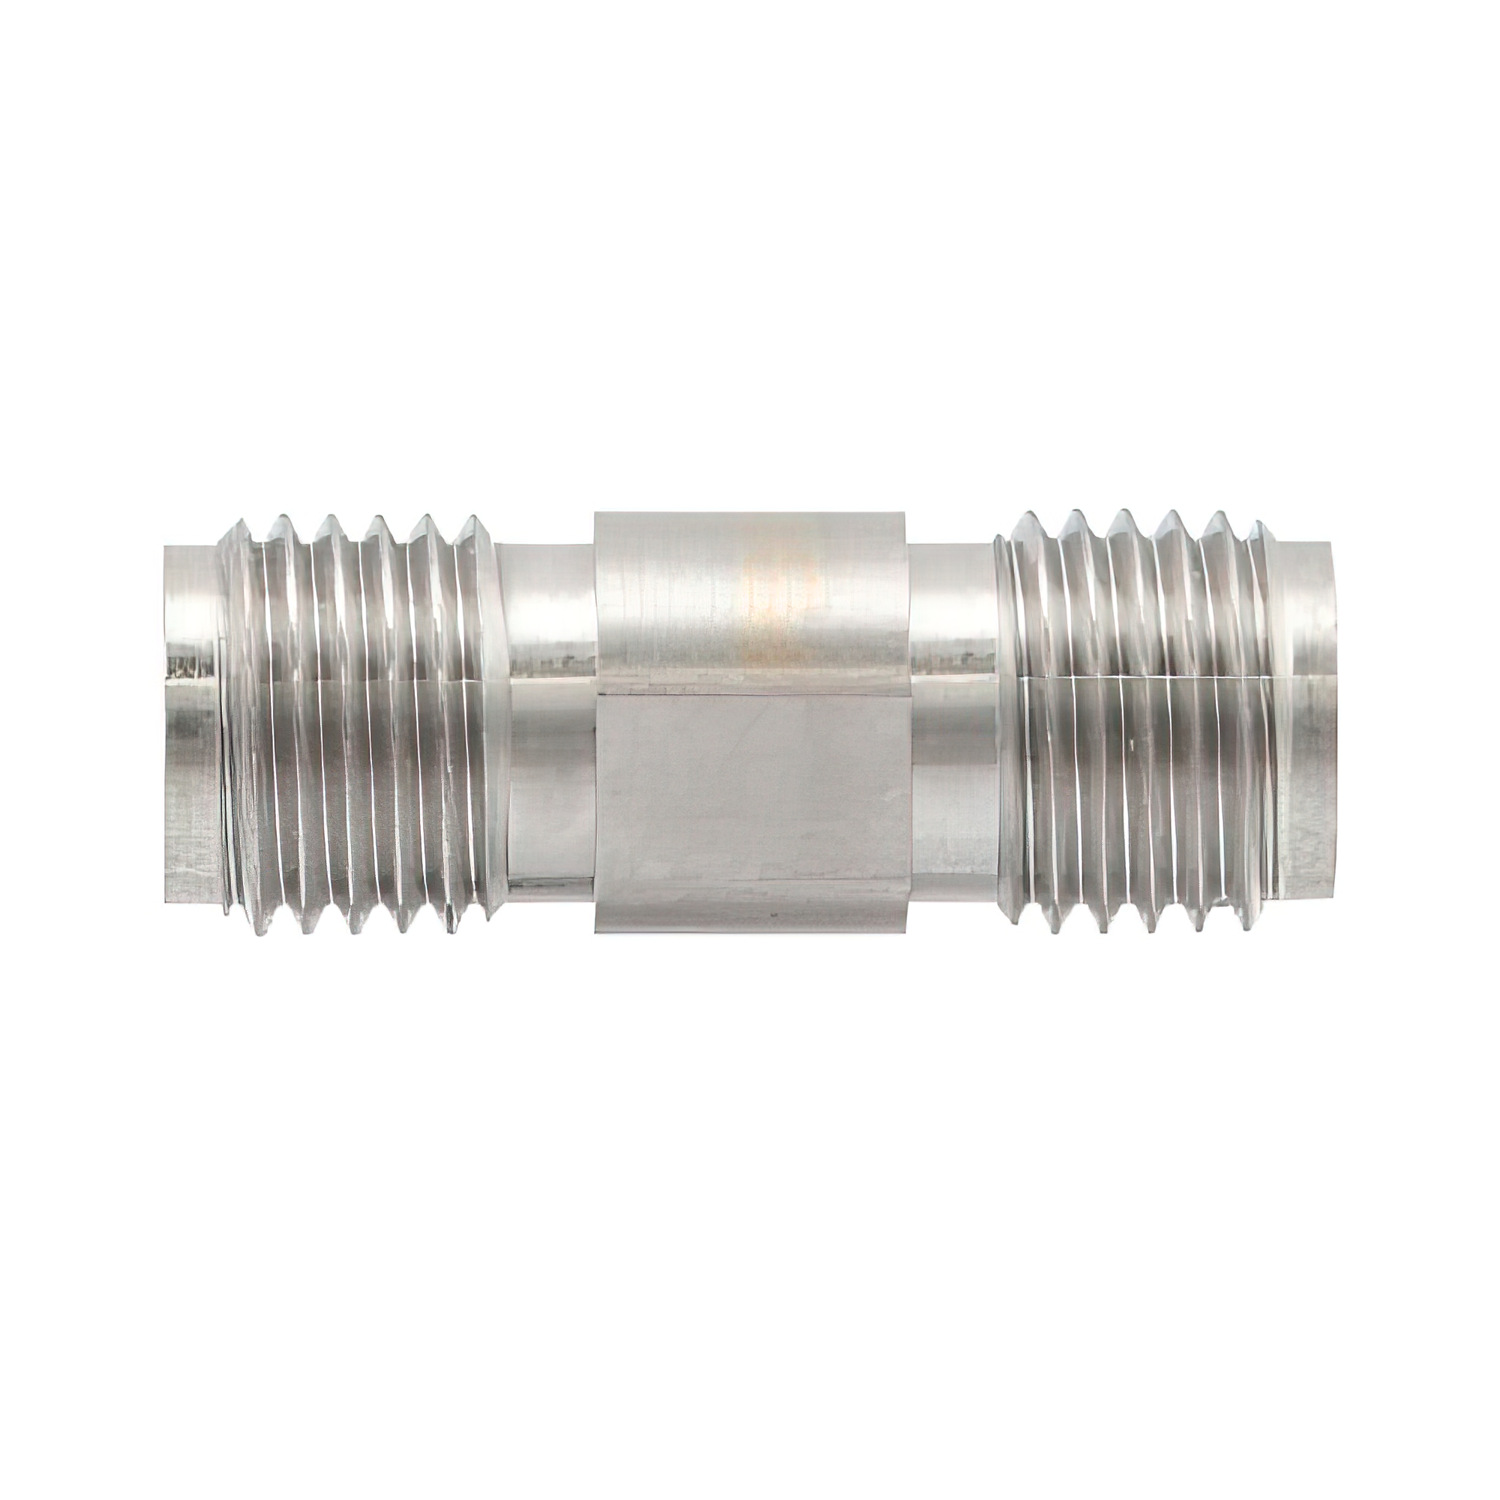 2.92mm Female to 2.92mm Female Adapter 2